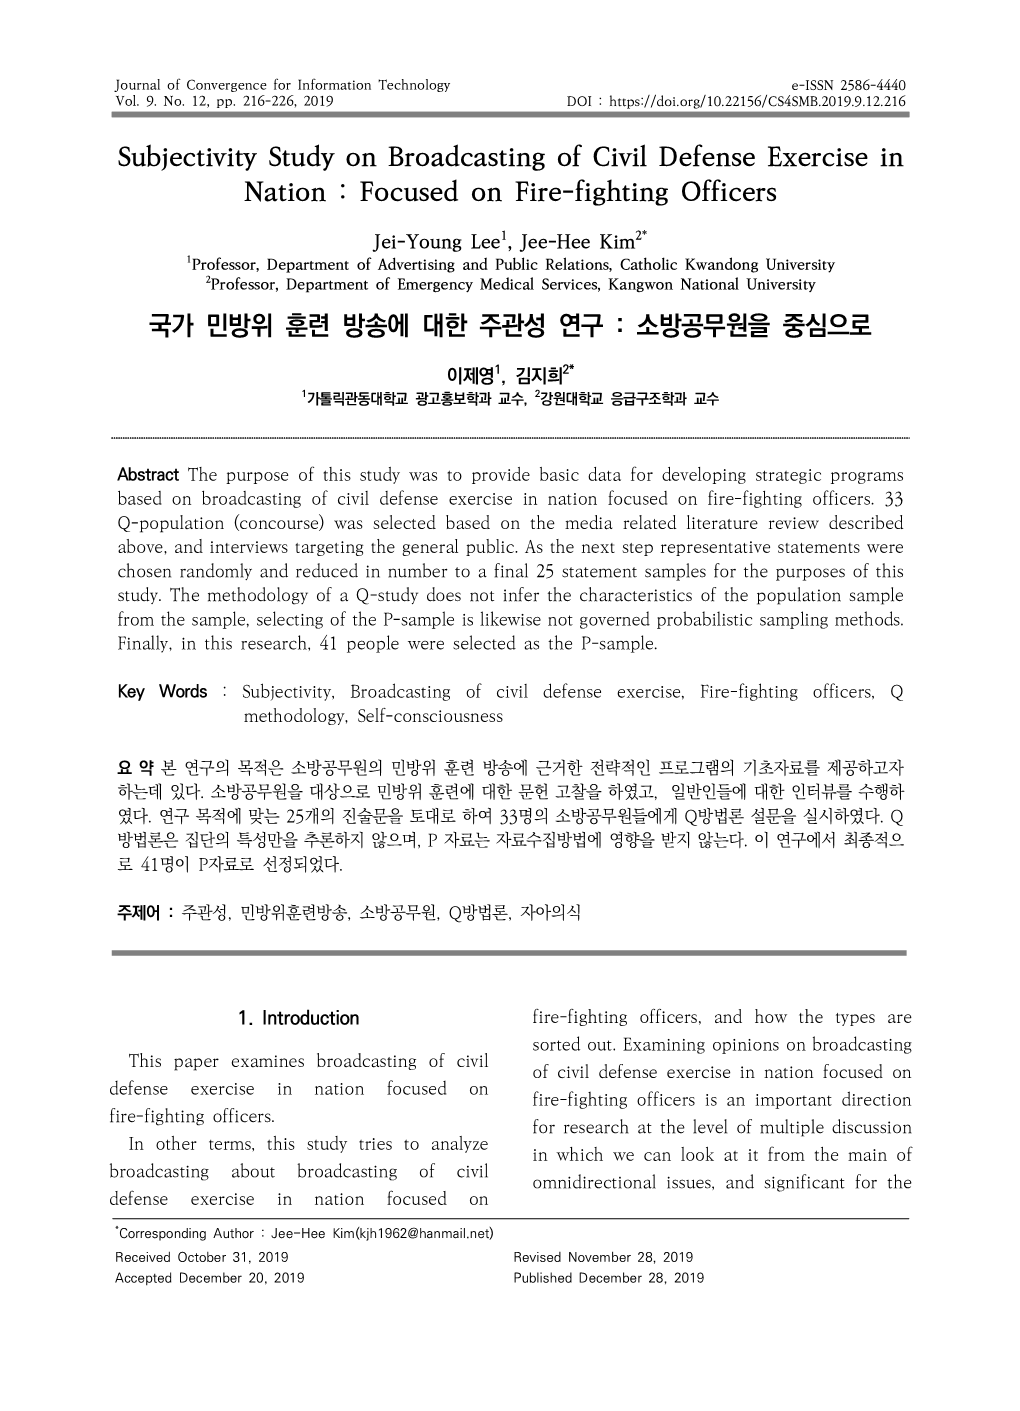 Subjectivity Study on Broadcasting of Civil Defense Exercise in Nation : Focused on Fire-Fighting Officers 국가 민방위 훈